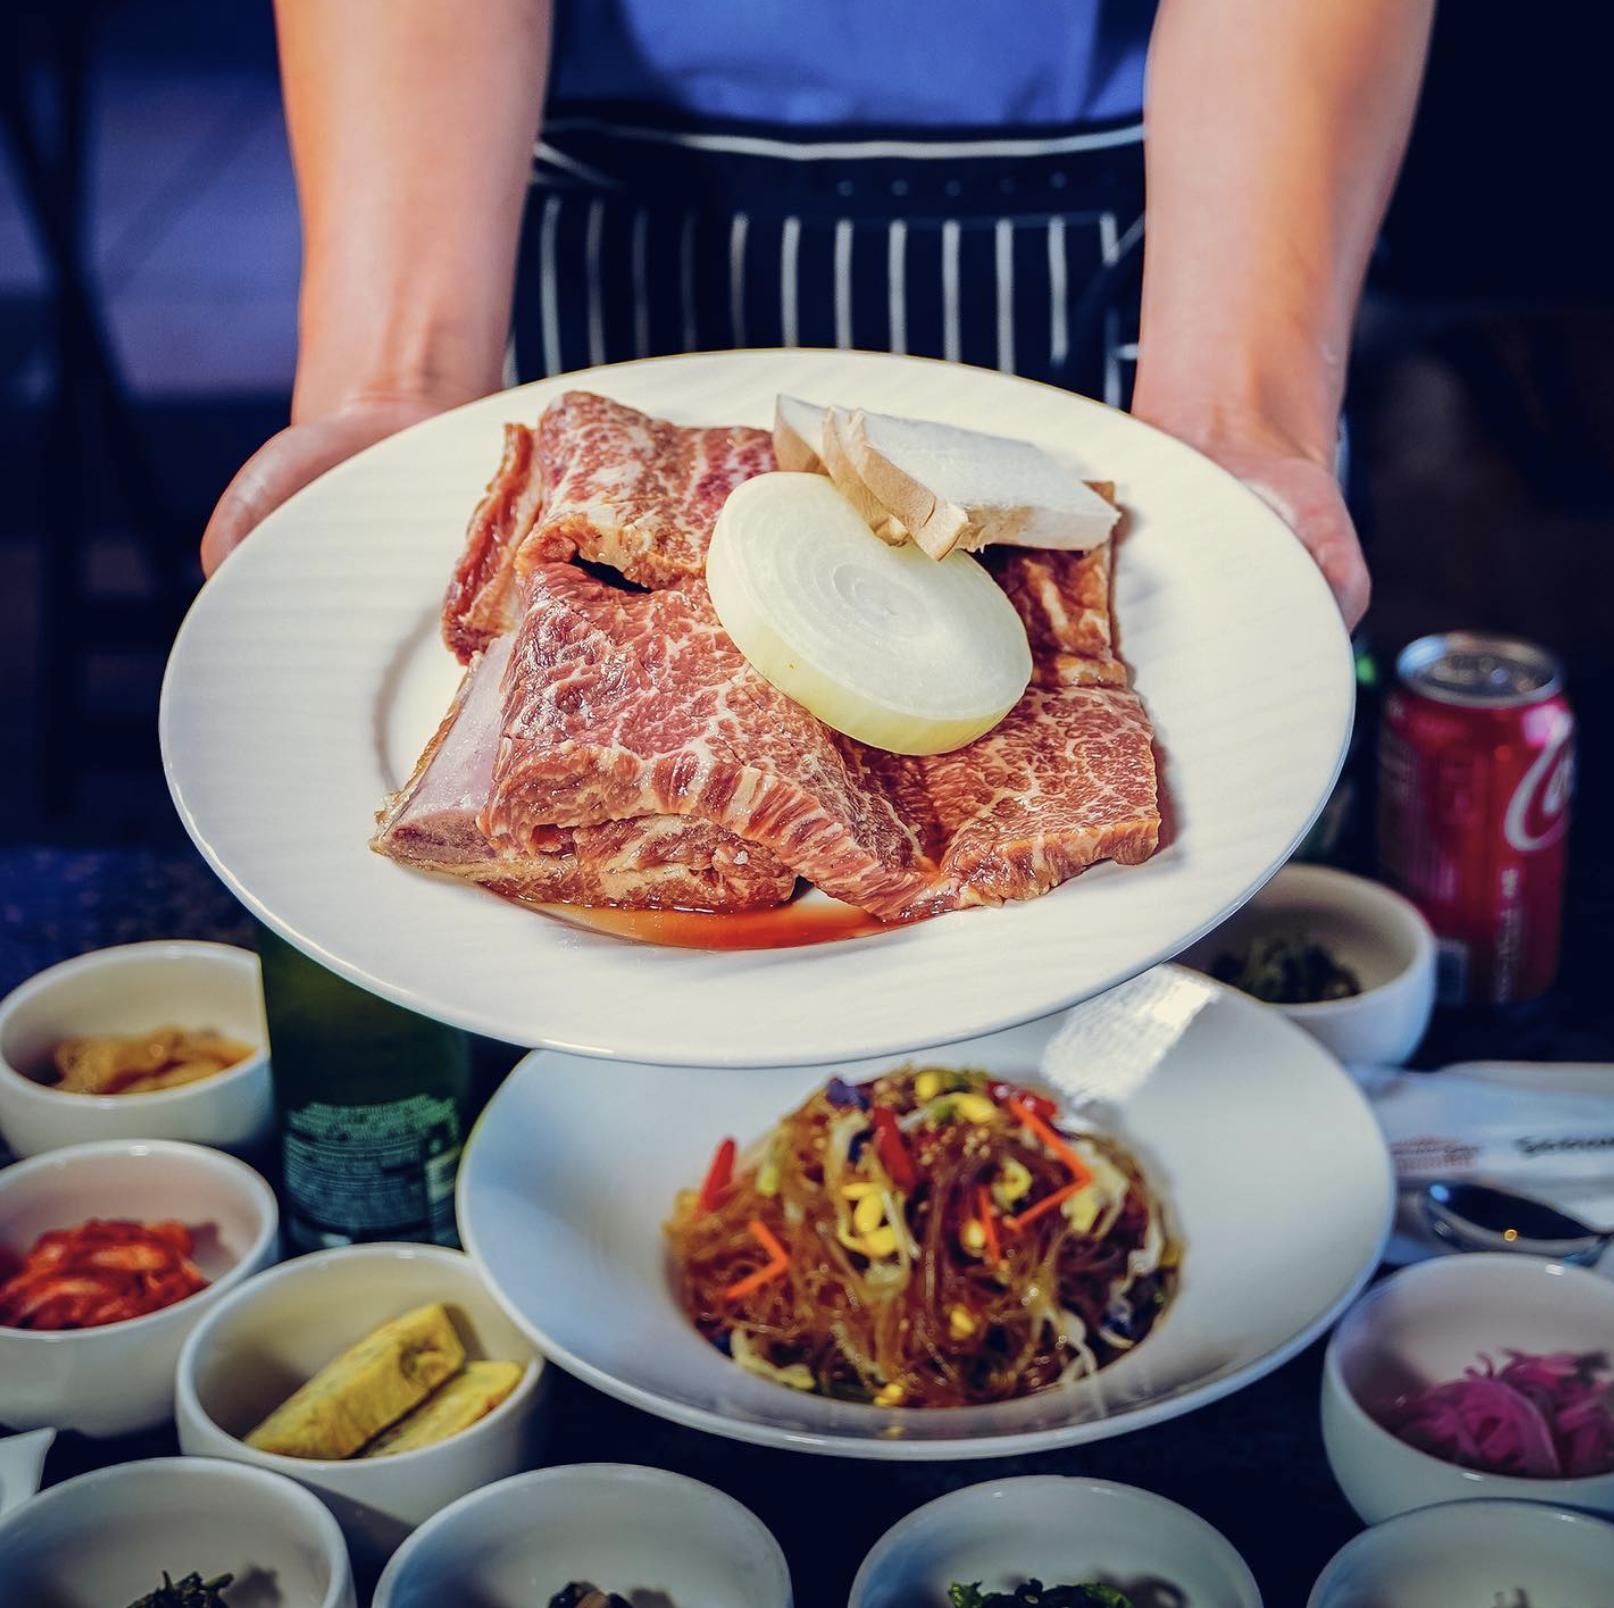 The 18 Finest Korean Barbecue Restaurants in Los Angeles